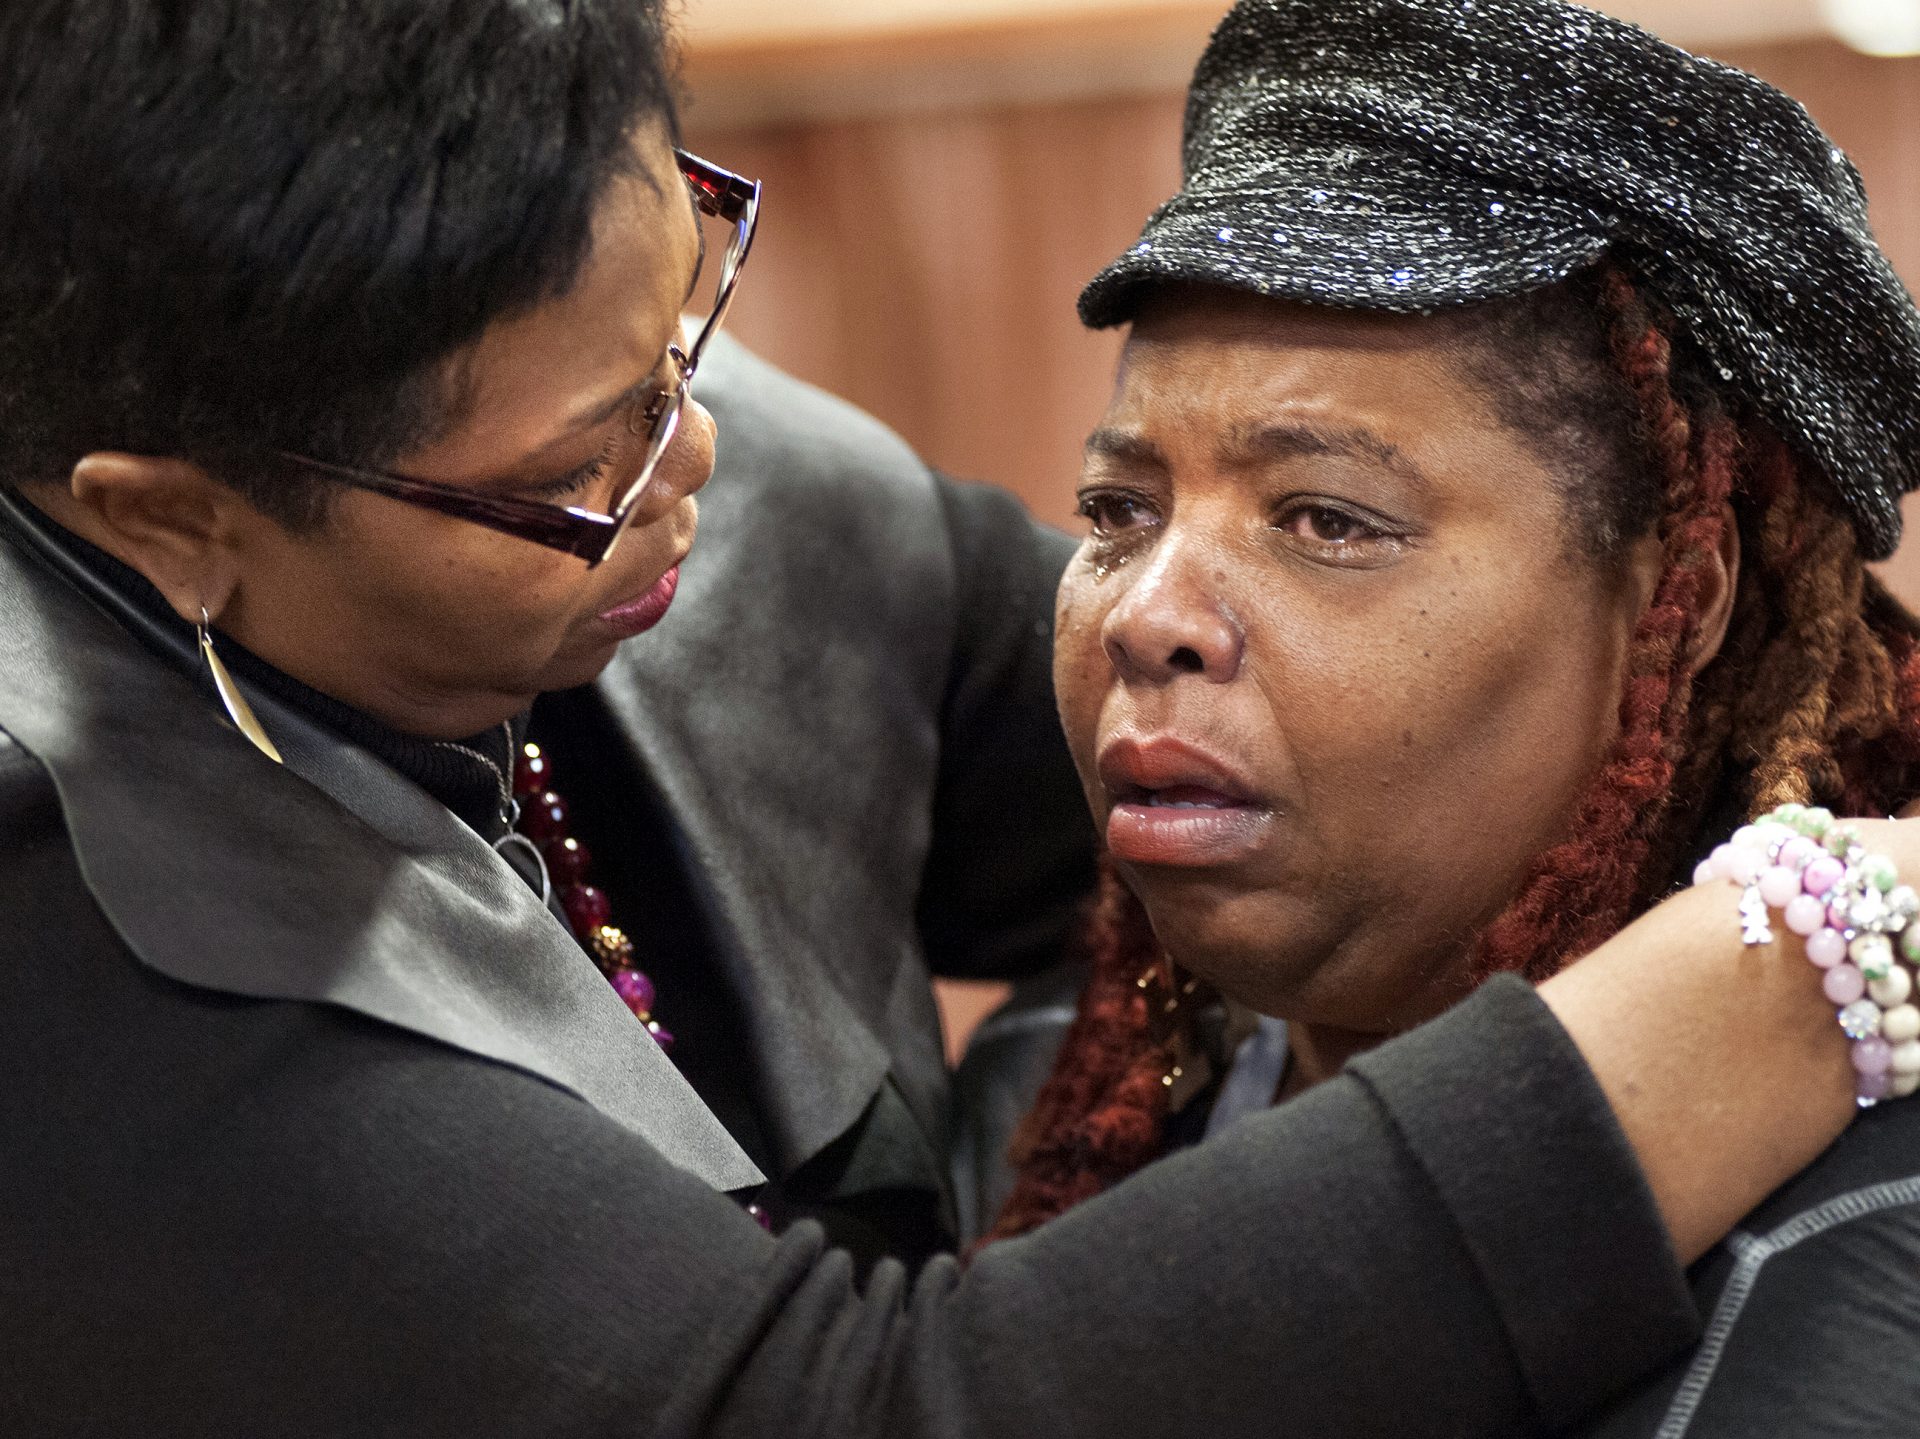 Rev. Traci Blackmon, left, comforts Dell Taylor during the opening meeting of Missouri's Ferguson Commission in 2014. "We've always had to figure out how to take care of our community, to take care of our neighborhoods and take care of our seniors," Blackmon says.